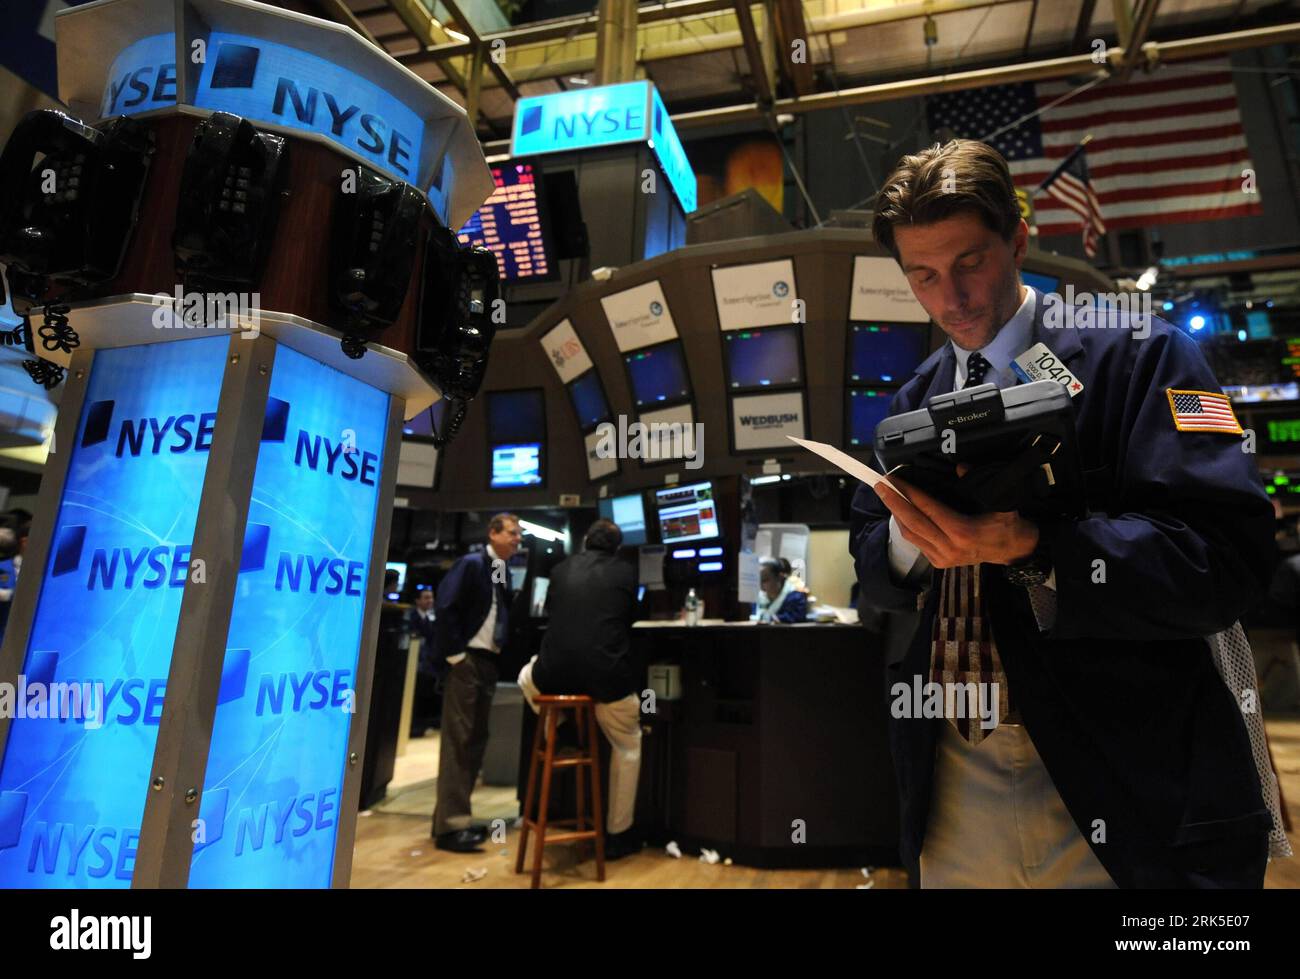 Bildnummer: 53745567  Datum: 22.01.2010  Copyright: imago/Xinhua  Traders work in the New York Stock Exchange, U.S., Jan. 22, 2010. Wall Street tumbled for the third straight session on Friday, with major averages ending down more than 2 percent, as investors were worried that s proposals of putting new restrictions on big banks could hurt economic recovery. The Dow Jones Industrial Average sank 216.9 points, or 2.09 percent, to 10,172.98. It s the Dow s first close below 10,200 since November. The Standard & Poor s 500 index fell 24.72, or 2.21 percent, to 1,091.76 and the Nasdaq tumbled 60.4 Stock Photo